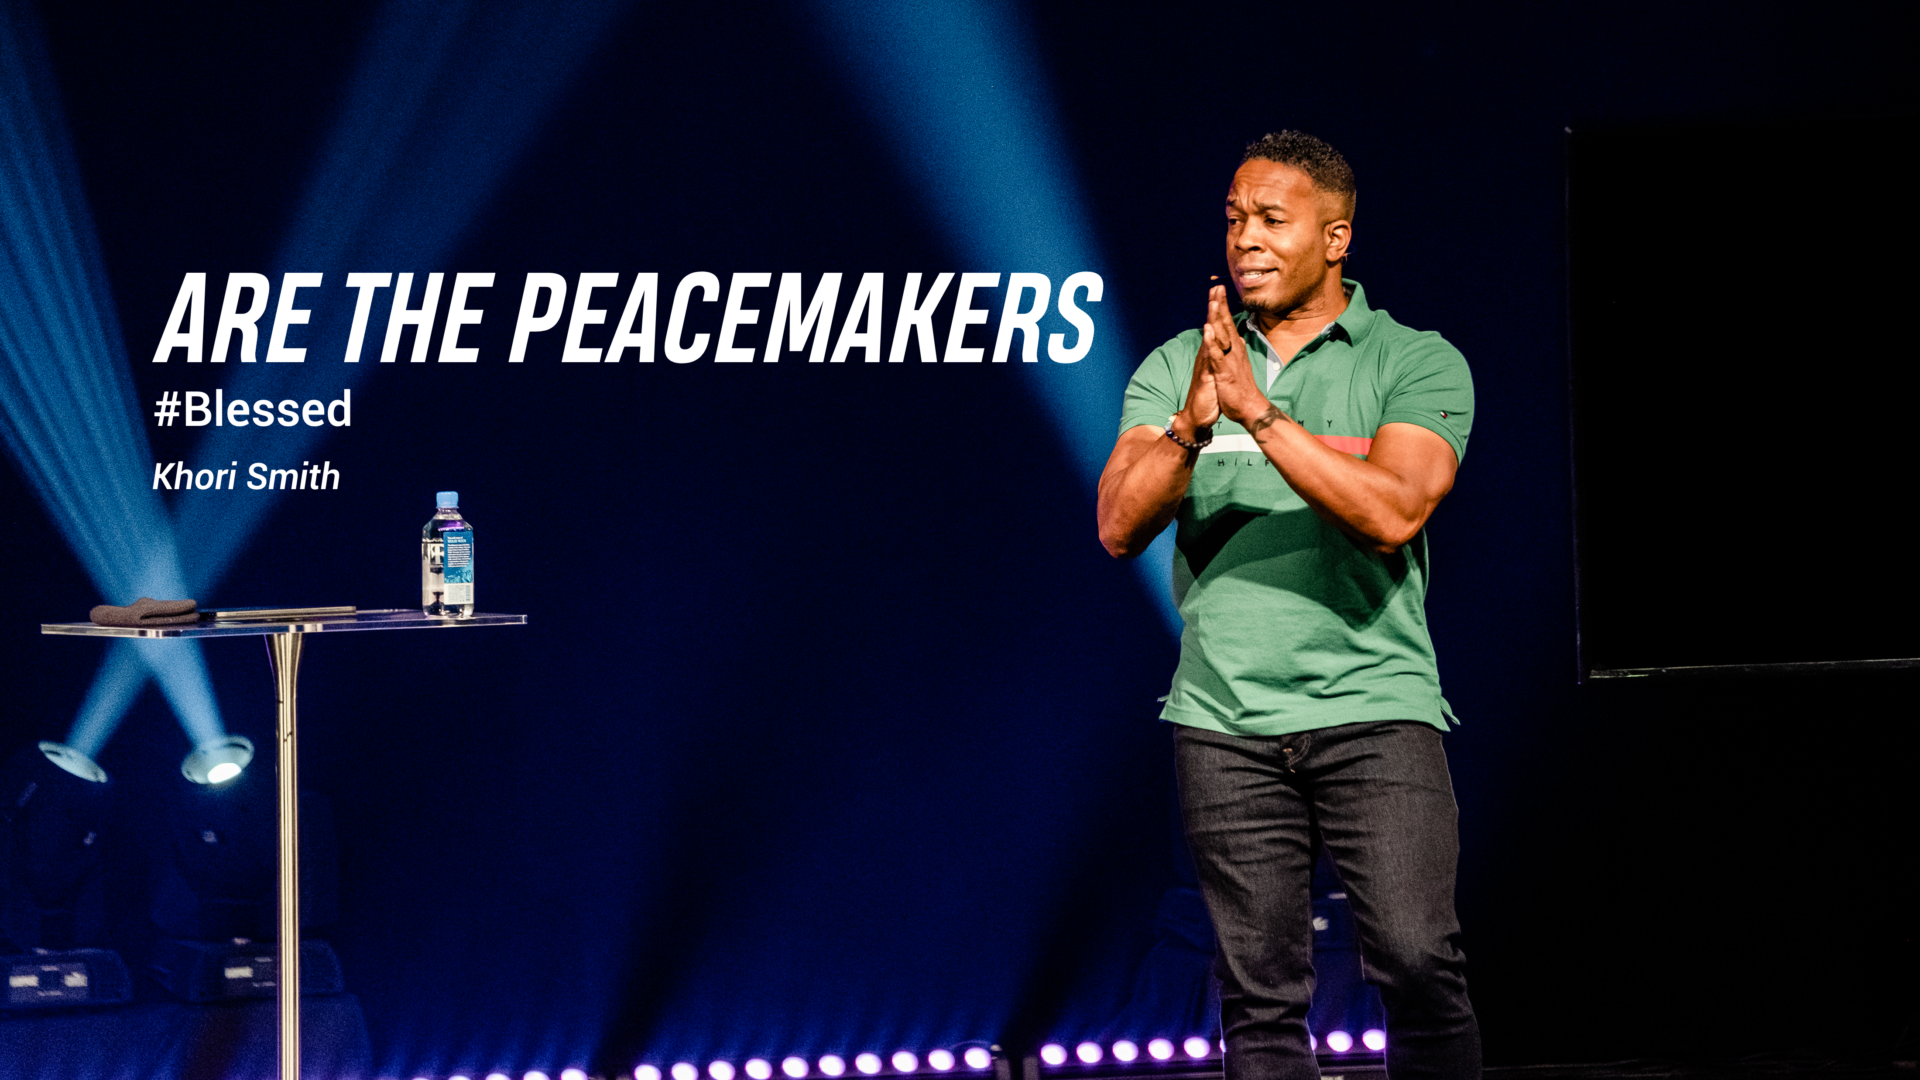 Are The Peacemakers Image